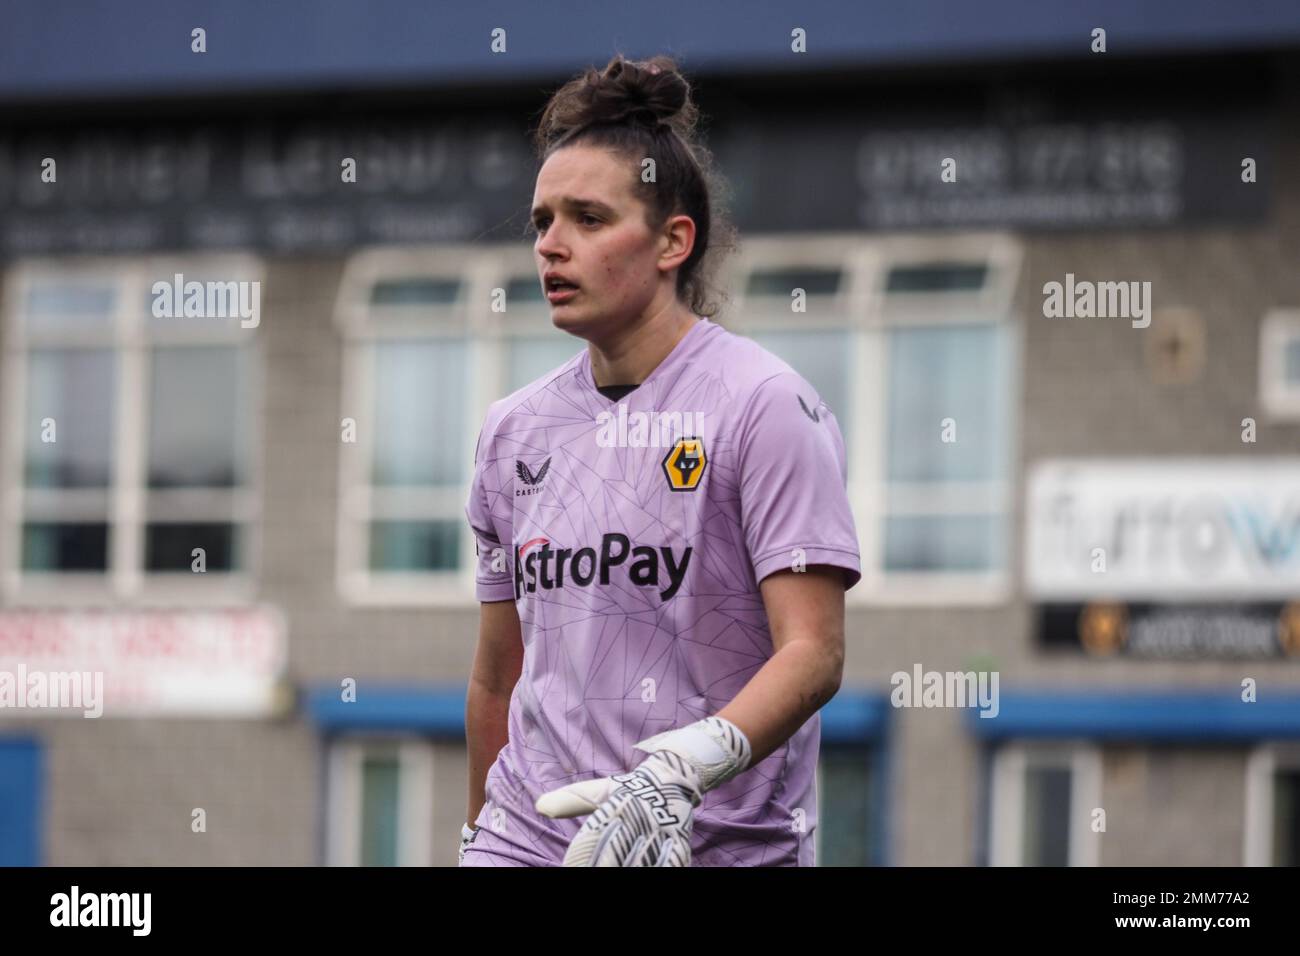 Telford, UK. 29th Jan, 2023. Telford, England, January 29th 2023: Goalkeeper Shan Turner (1 Wolverhampton Wanderers) in action during the Womens FA Cup game between Wolverhampton Wanderers and West Ham United at New Bucks Head in Telford, England (Natalie Mincher/SPP) Credit: SPP Sport Press Photo. /Alamy Live News Stock Photo